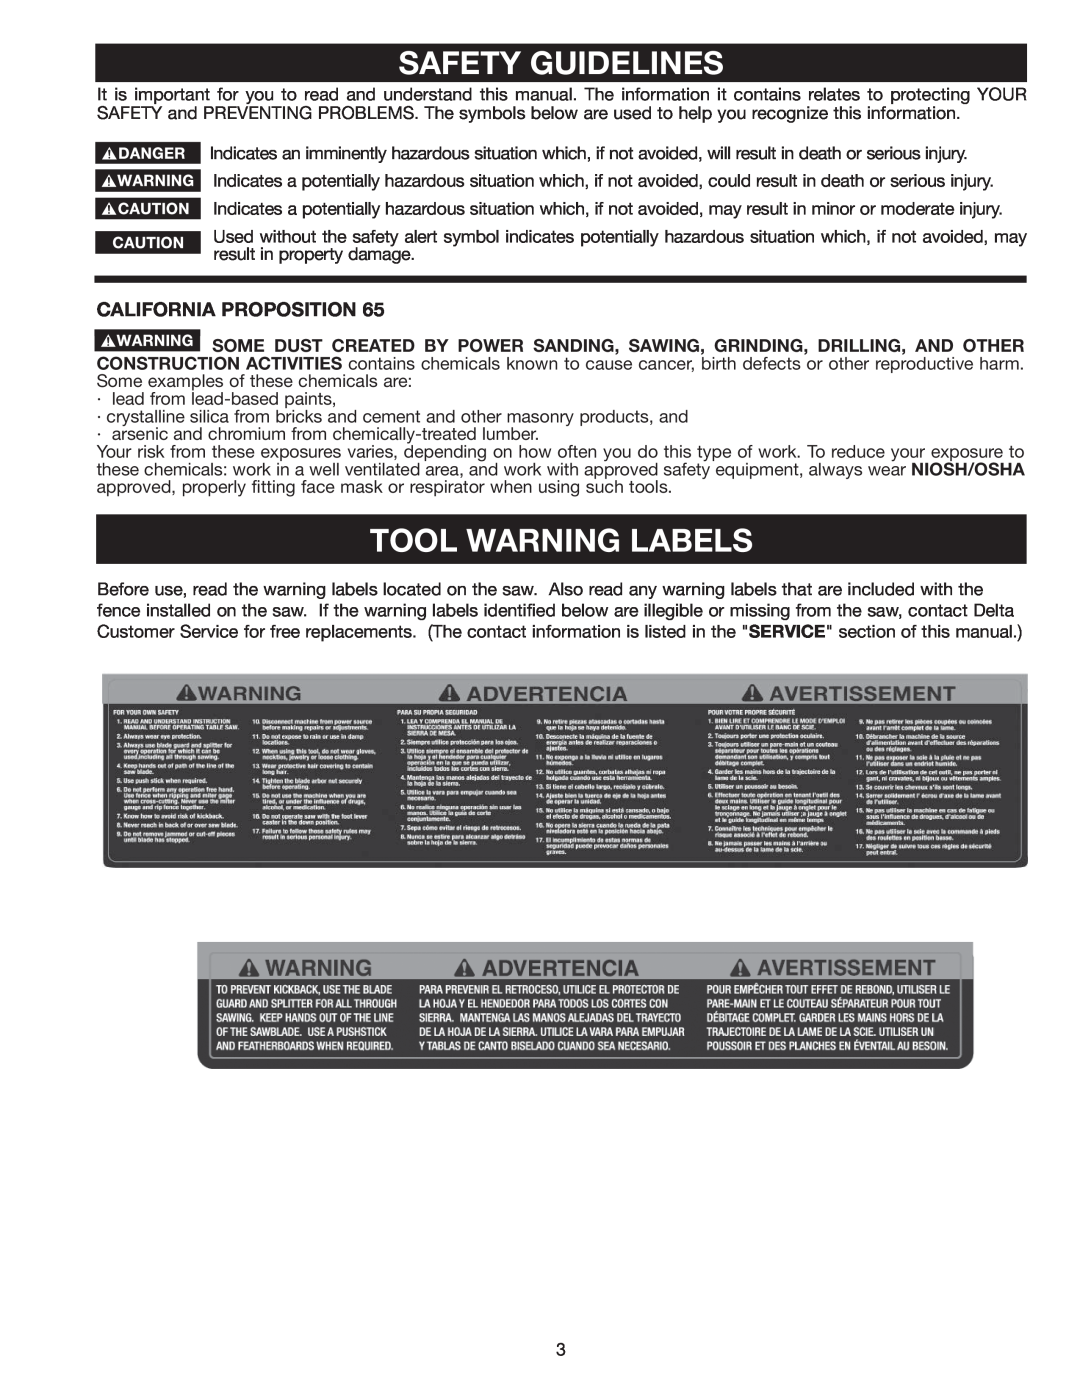 Delta 36-978 instruction manual Safety Guidelines, Tool Warning Labels, California Proposition 